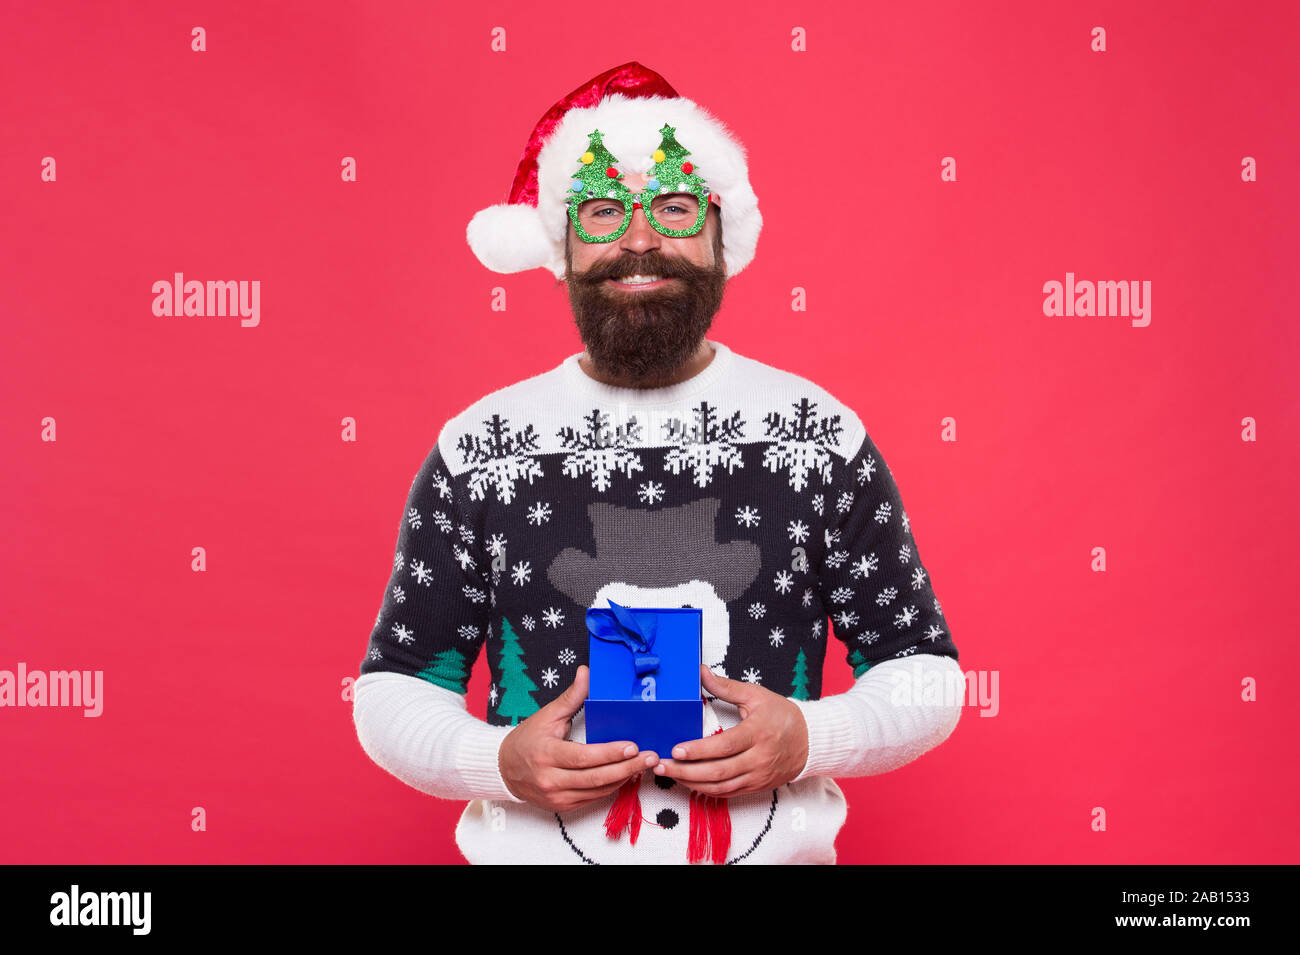 Holiday Gift Delivery Happy Santa Hold Christmas Gift Bearded Man Got Gift Red Background Holiday Gift Christmas And New Year Celebration Shopping Delivery Service Wrapped Box Present For Men Stock Photo